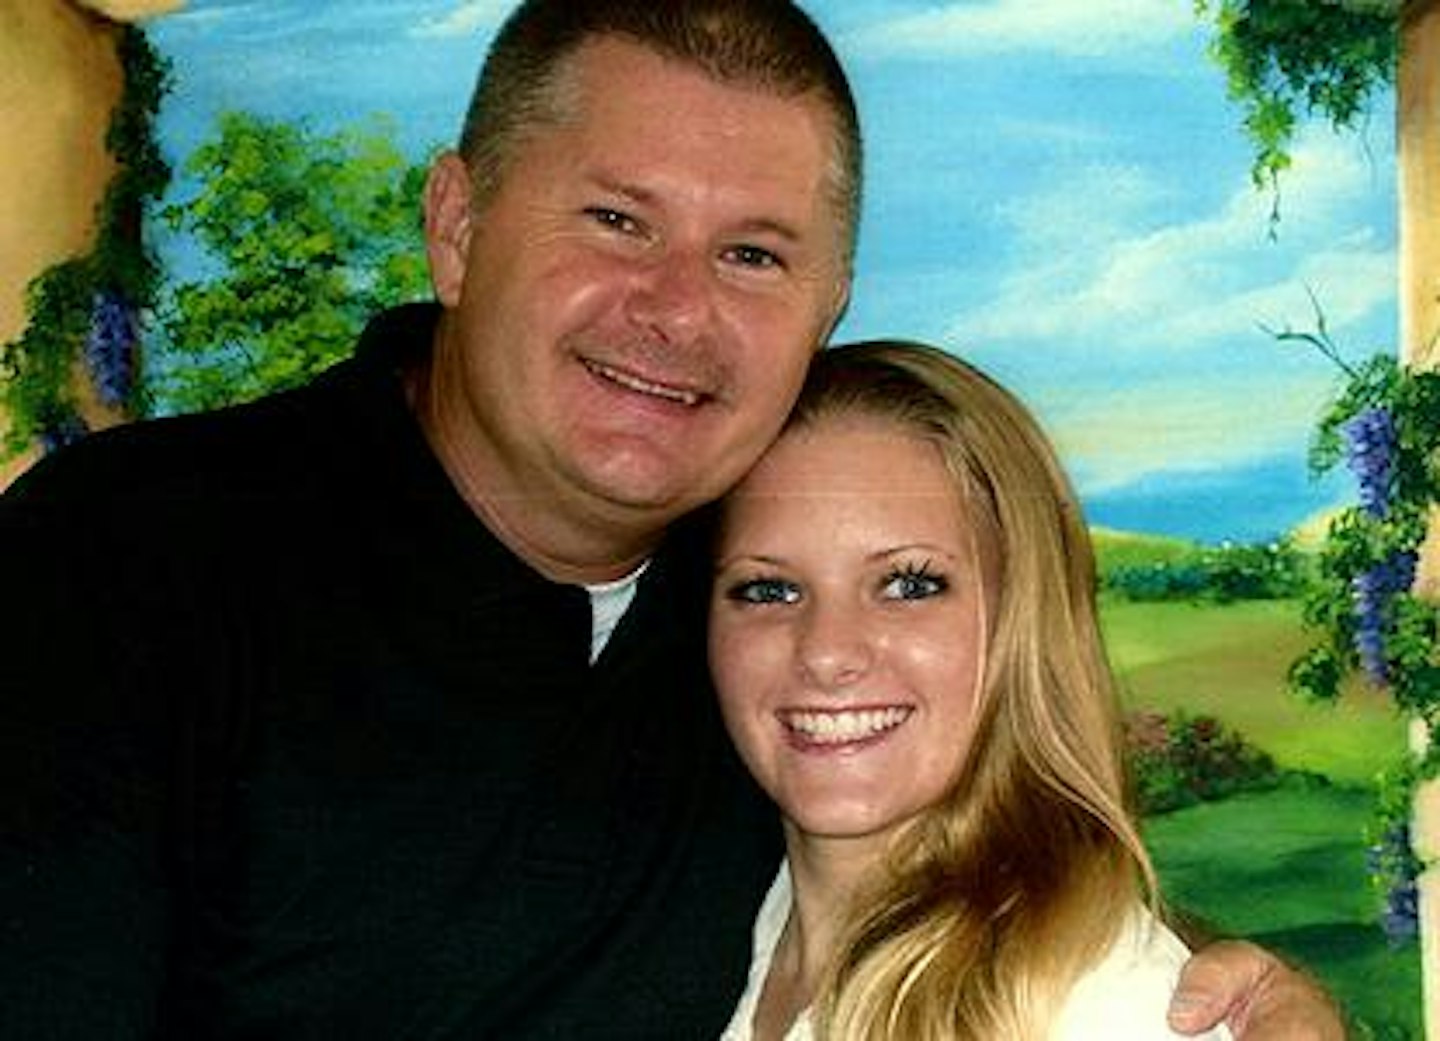 Terry Caffey and his daughter - who was instrumental in the deaths of her mother and siblings